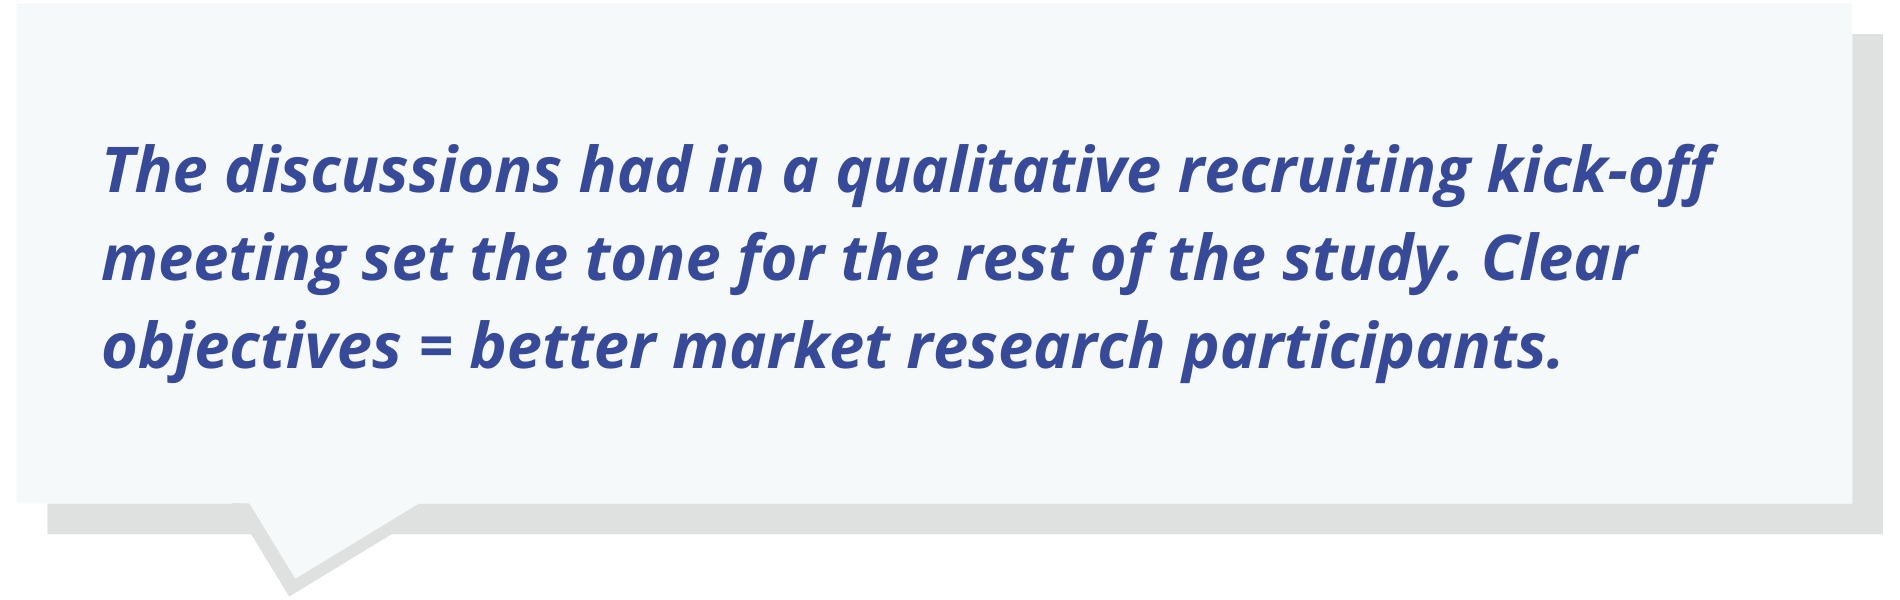 The discussions had in a qualitative recruiting kick-off meeting set the tone for the rest of the study. Clear objectives = better market research participants.